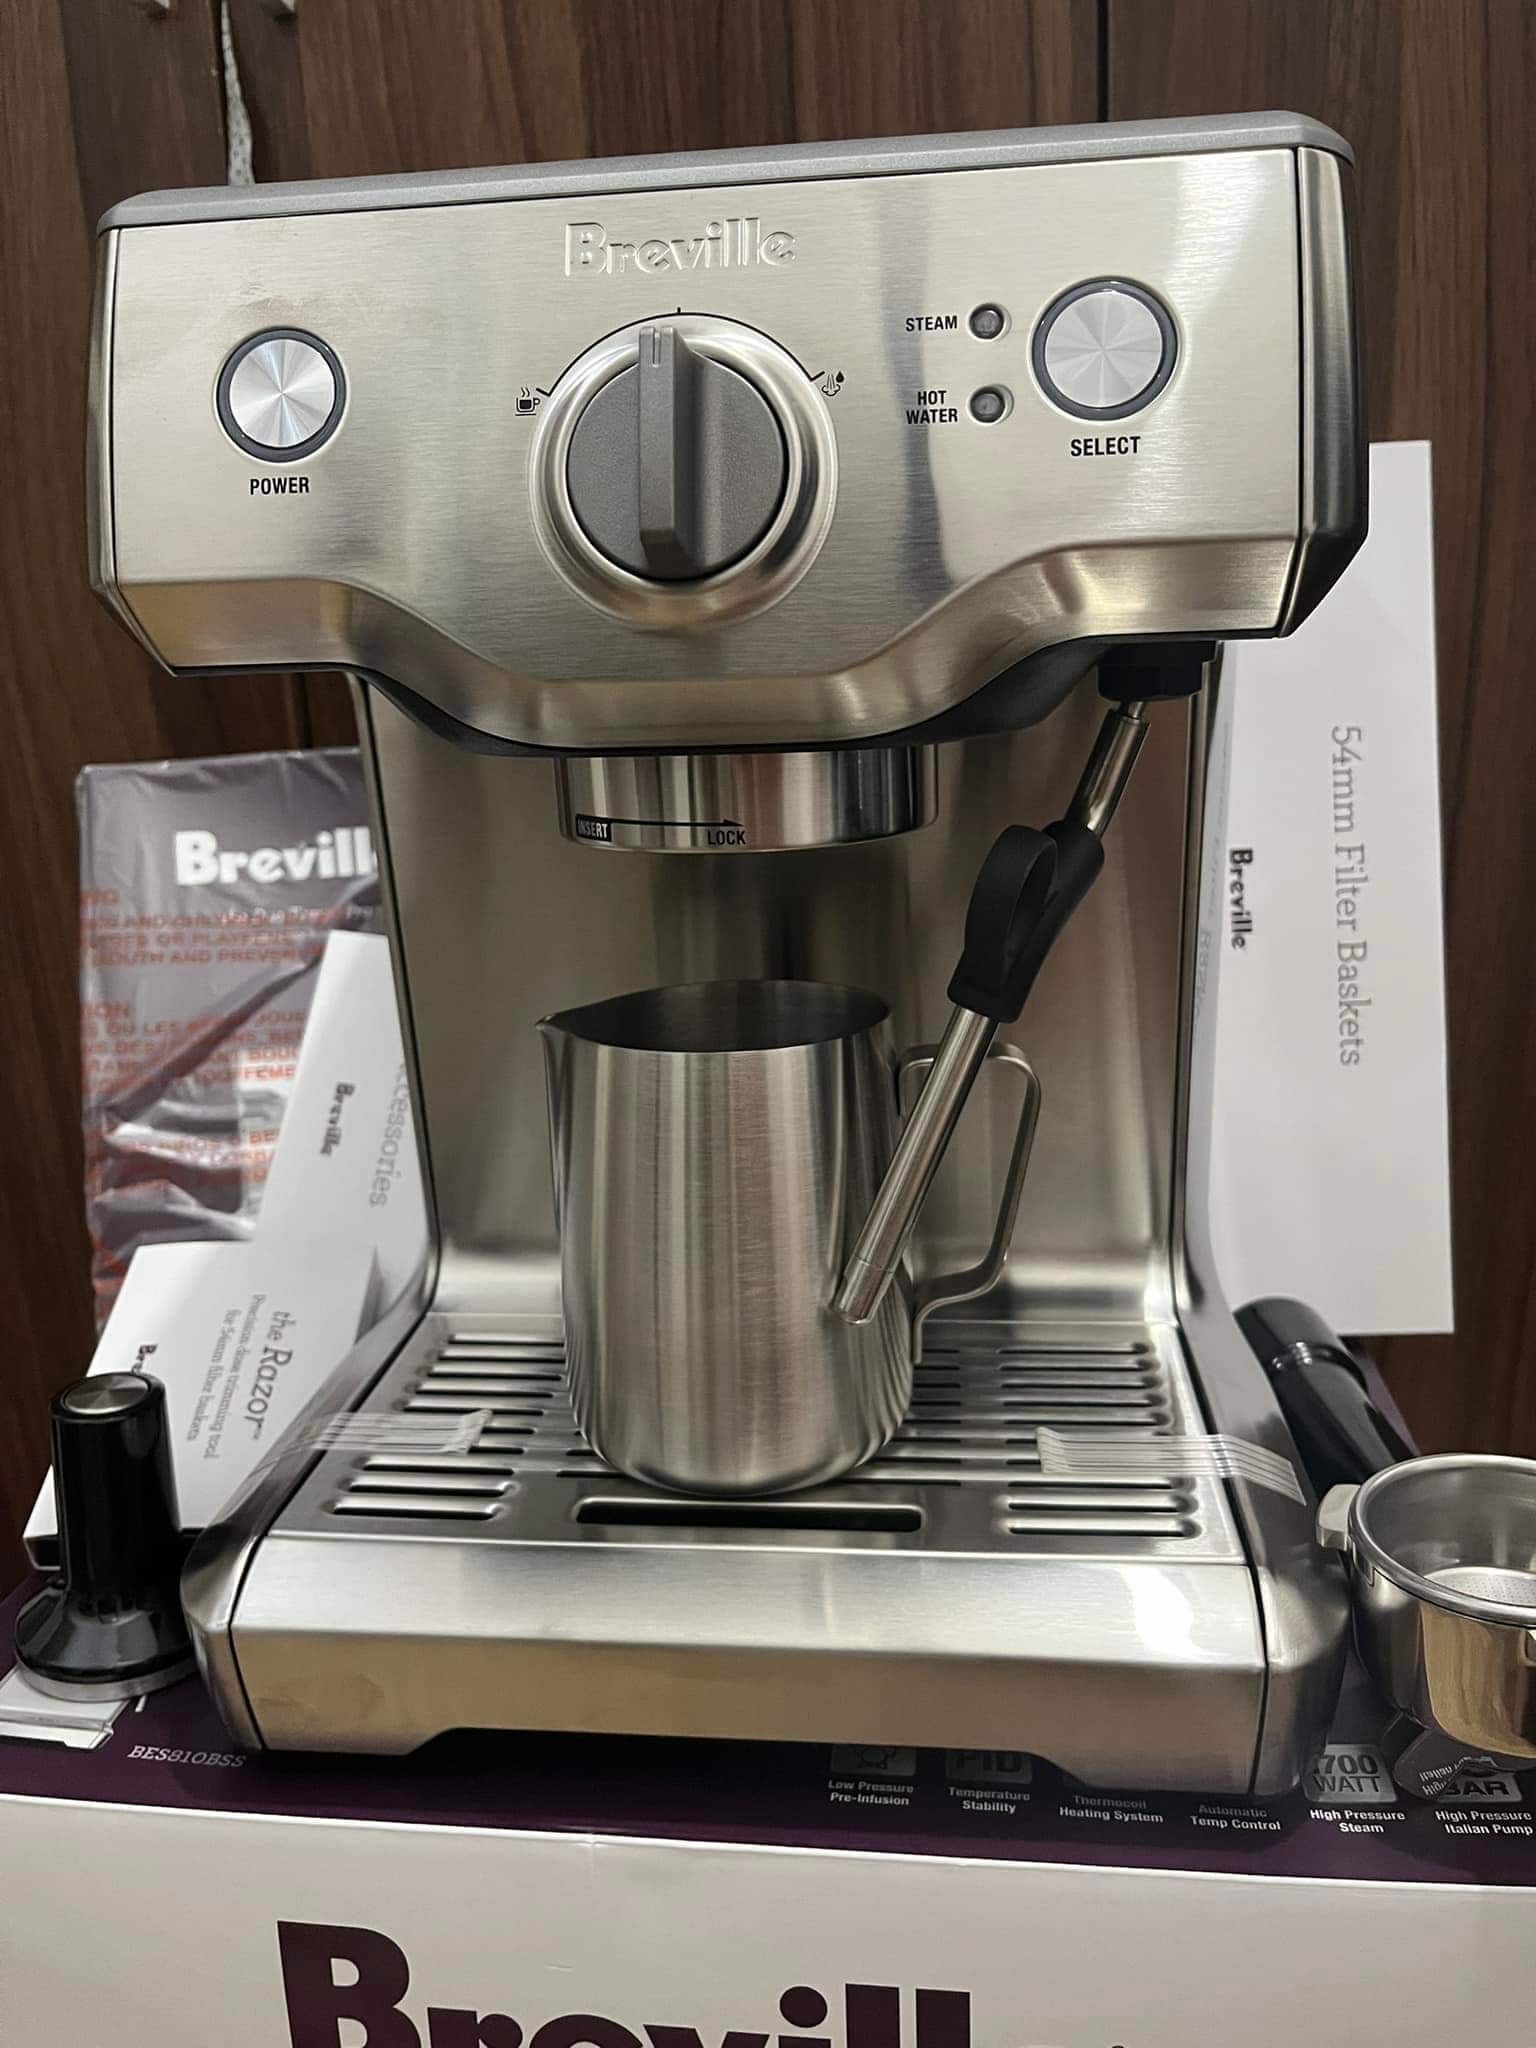 the Breville looks more high-end, more high-tech, and more professional 